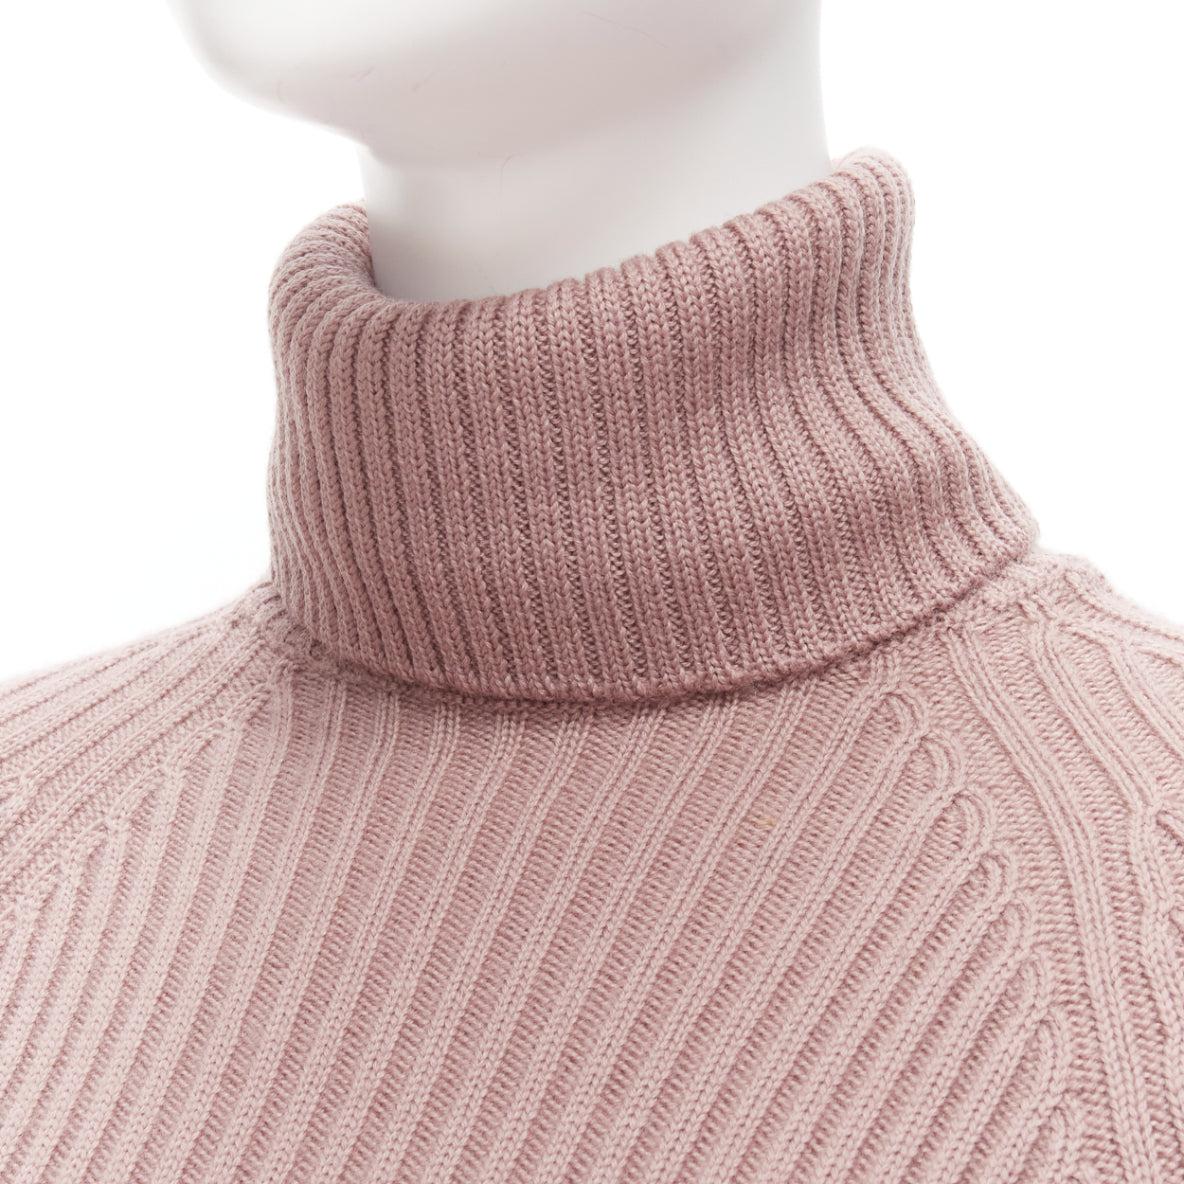 DOLCE GABBANA mauve pink raglan ribbed turtleneck sweater top IT42 M
Reference: GIYG/A00337
Brand: Dolce Gabbana
Designer: Domenico Dolce and Stefano Gabbana
Material: Feels like wool
Color: Pink
Pattern: Solid
Closure: Pullover
Made in: